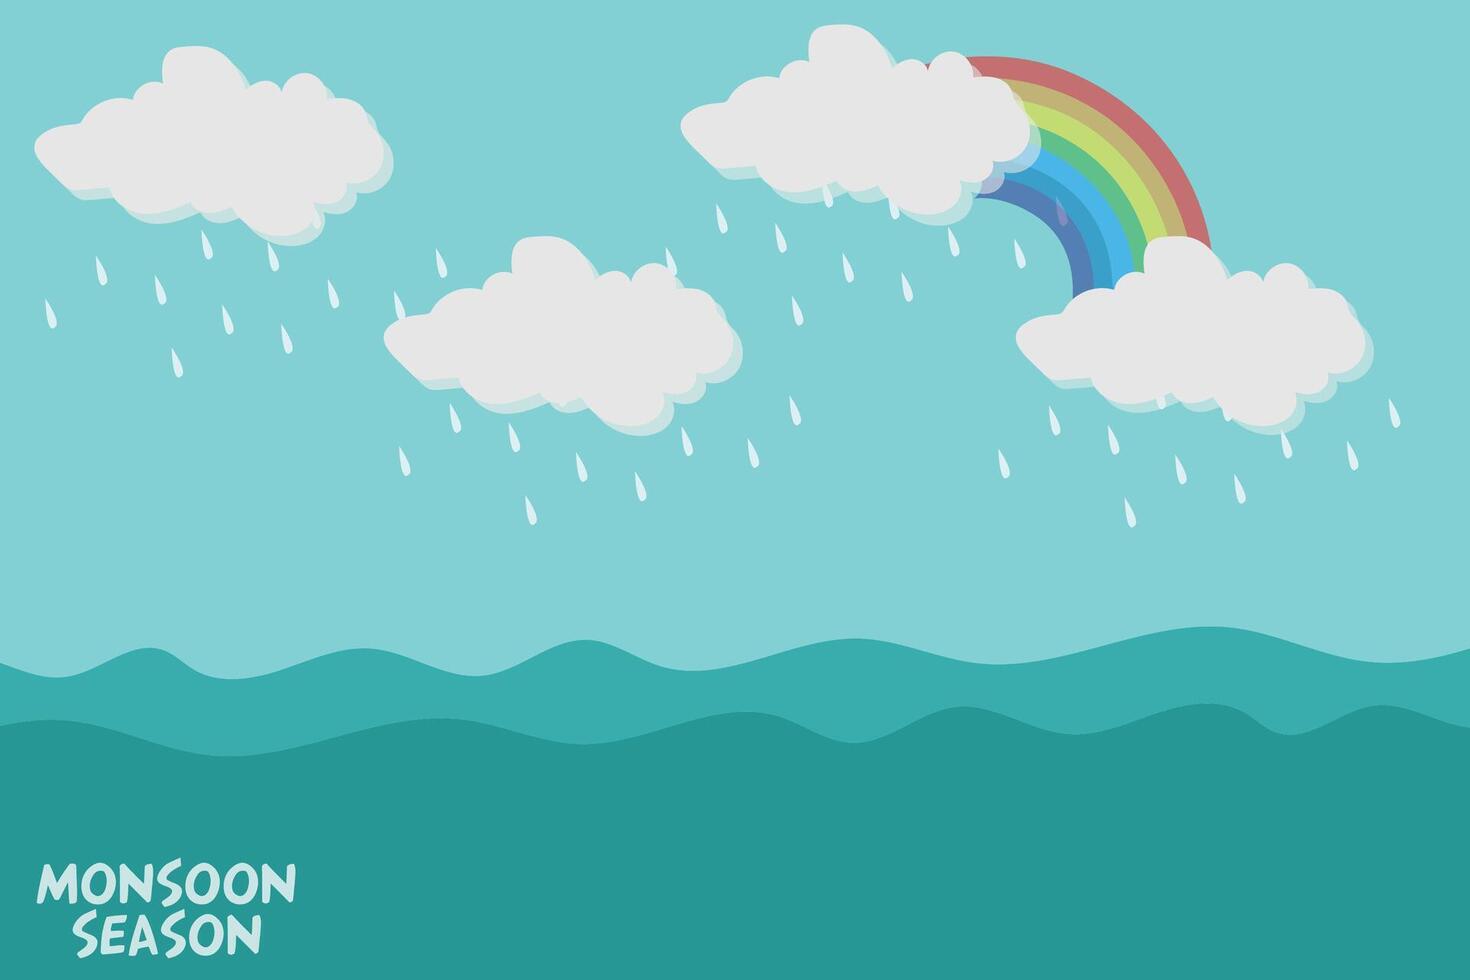 Monsoon season banner background with clouds, rainbow, and rain drops. Vector illustration.